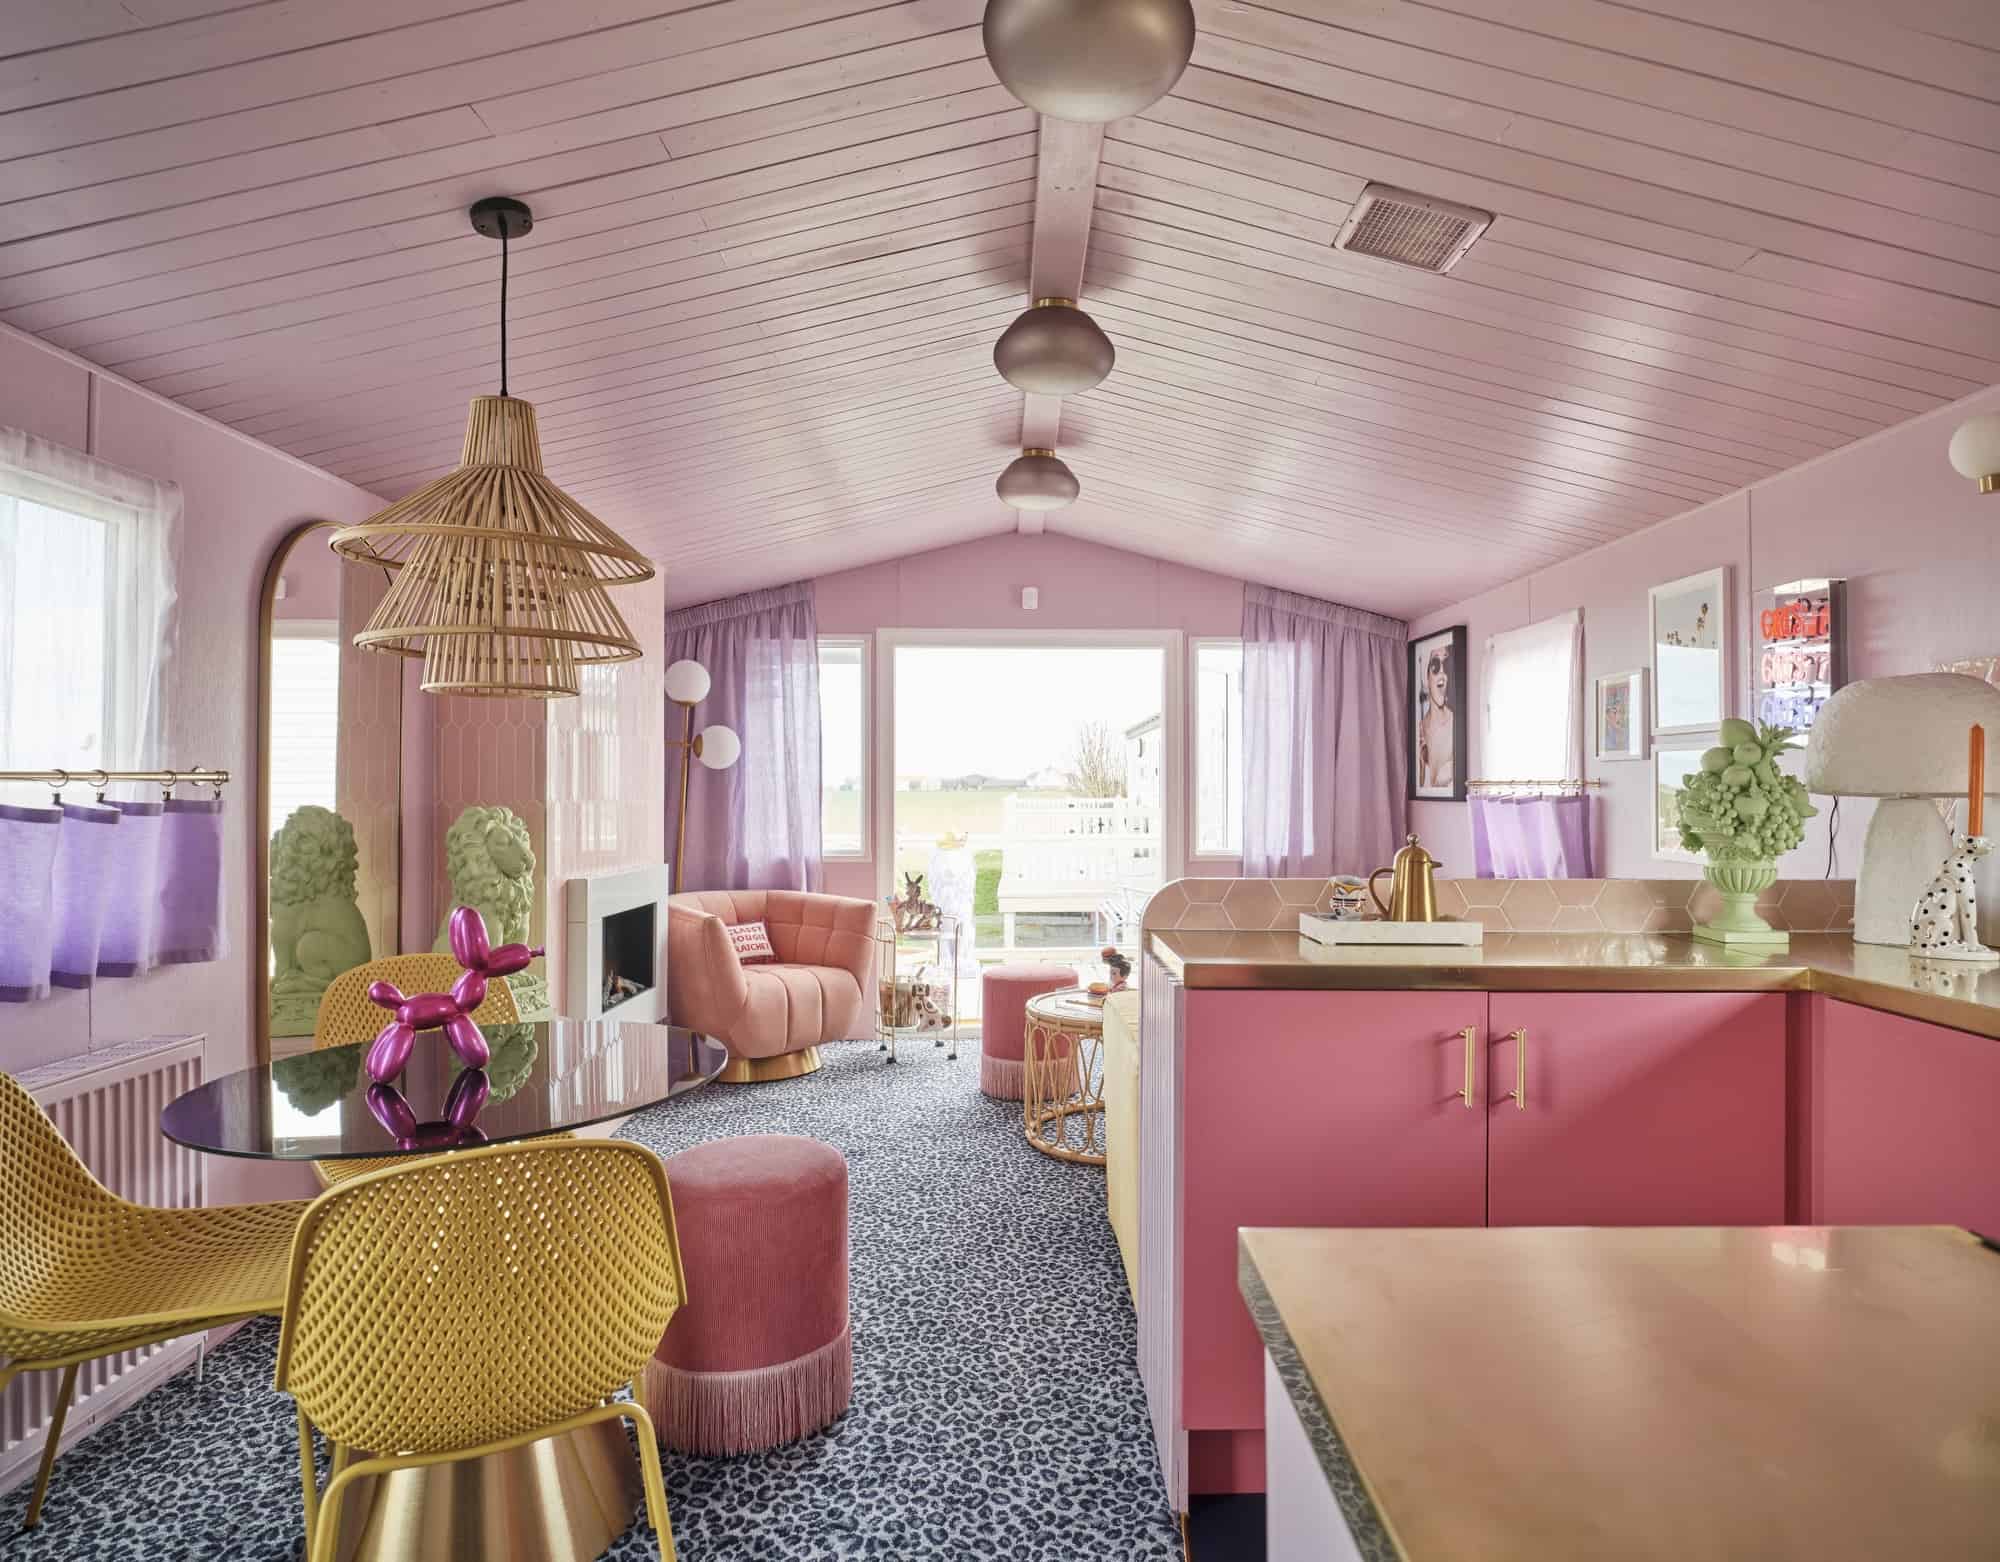 Dixie TN31 - A static caravan with huge personality! This location is a clash of colour, pattern and texture and a fantastic backdrop for photoshoots - The Location Guys